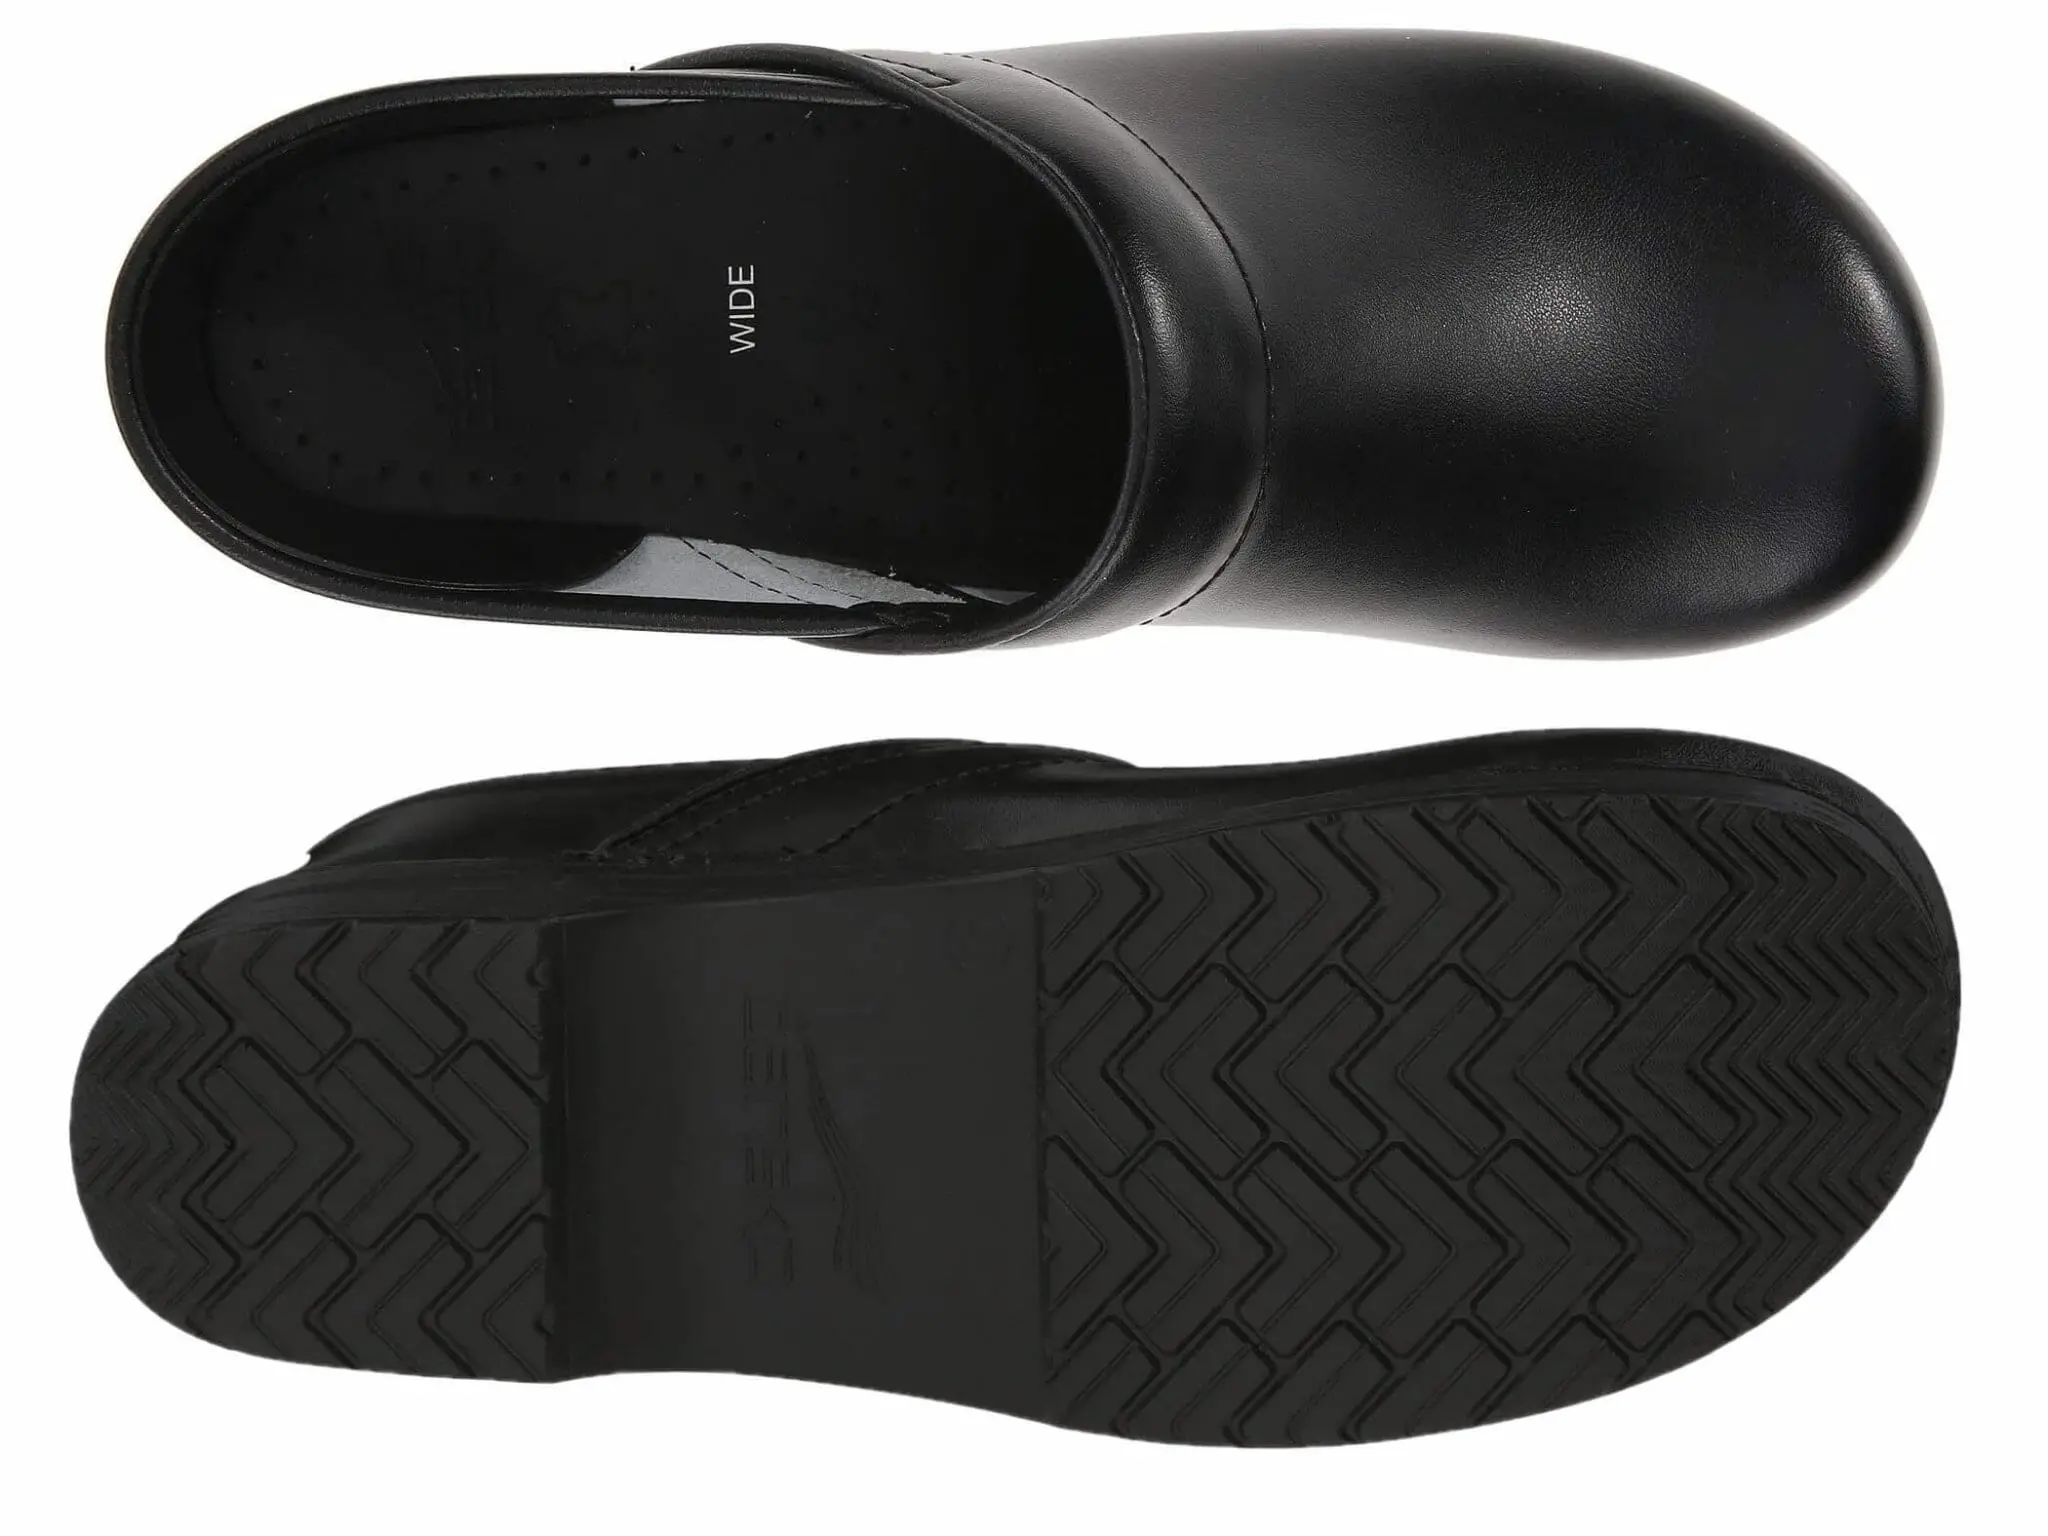 Details of the insole and outsole of the Dansko Professional chef shoes